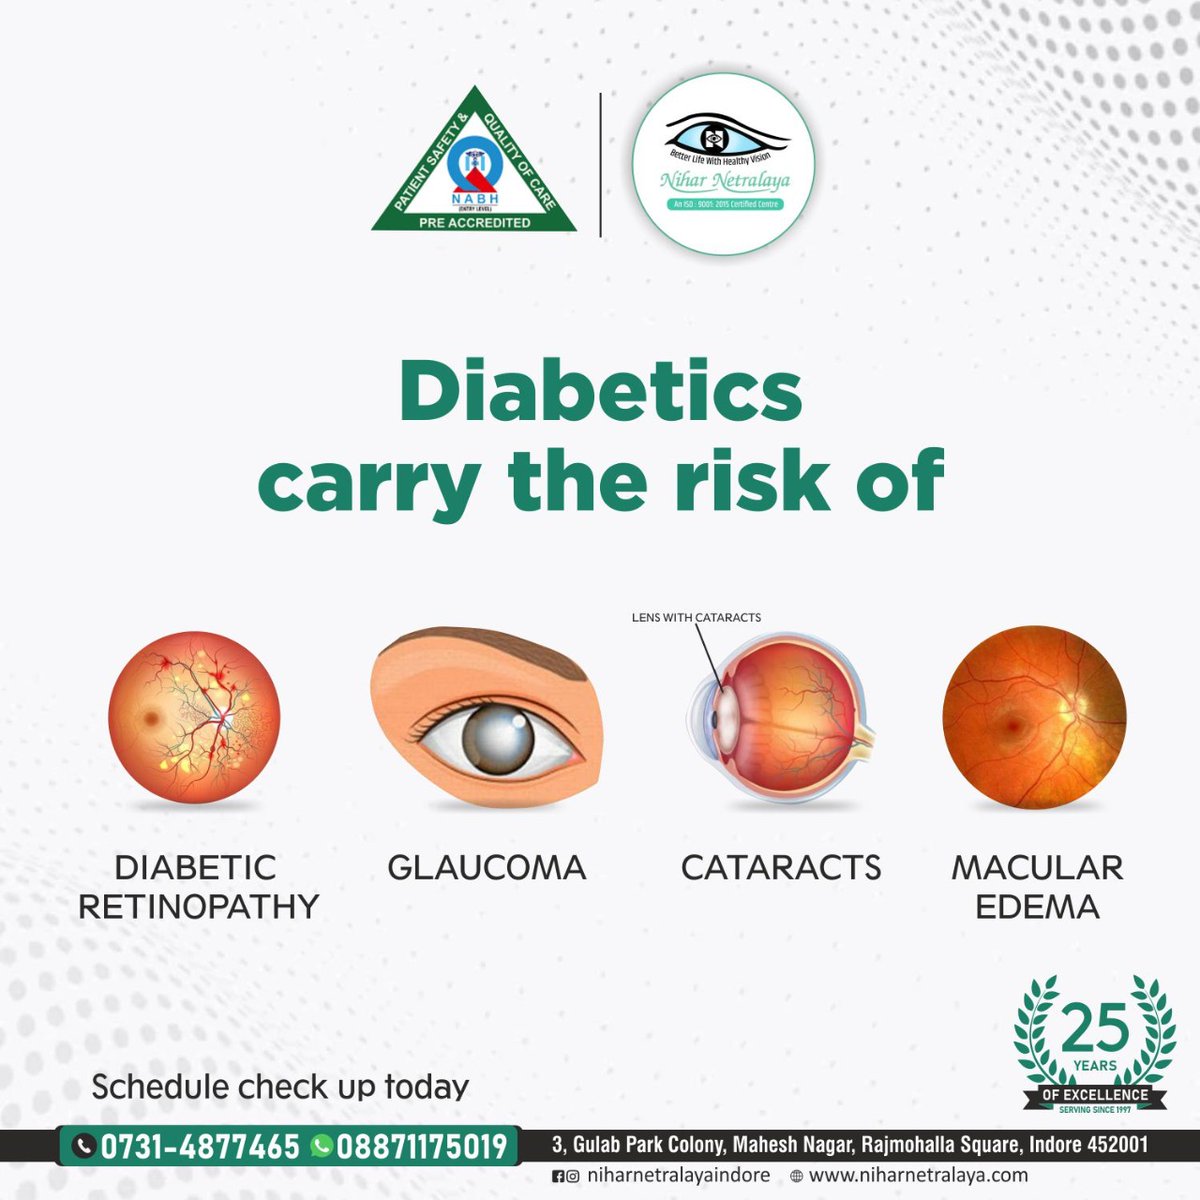 It is recommended for diabetic people to get their eyesight tested at regular intervals to avoid vision loss.

Get connected today!
 #diabeticmacularedema
#niharnetralaya
#lasik #lasikeyesurgery #optometrist #opthalmology #opthalmologist #digitalmarketing #facebookpost